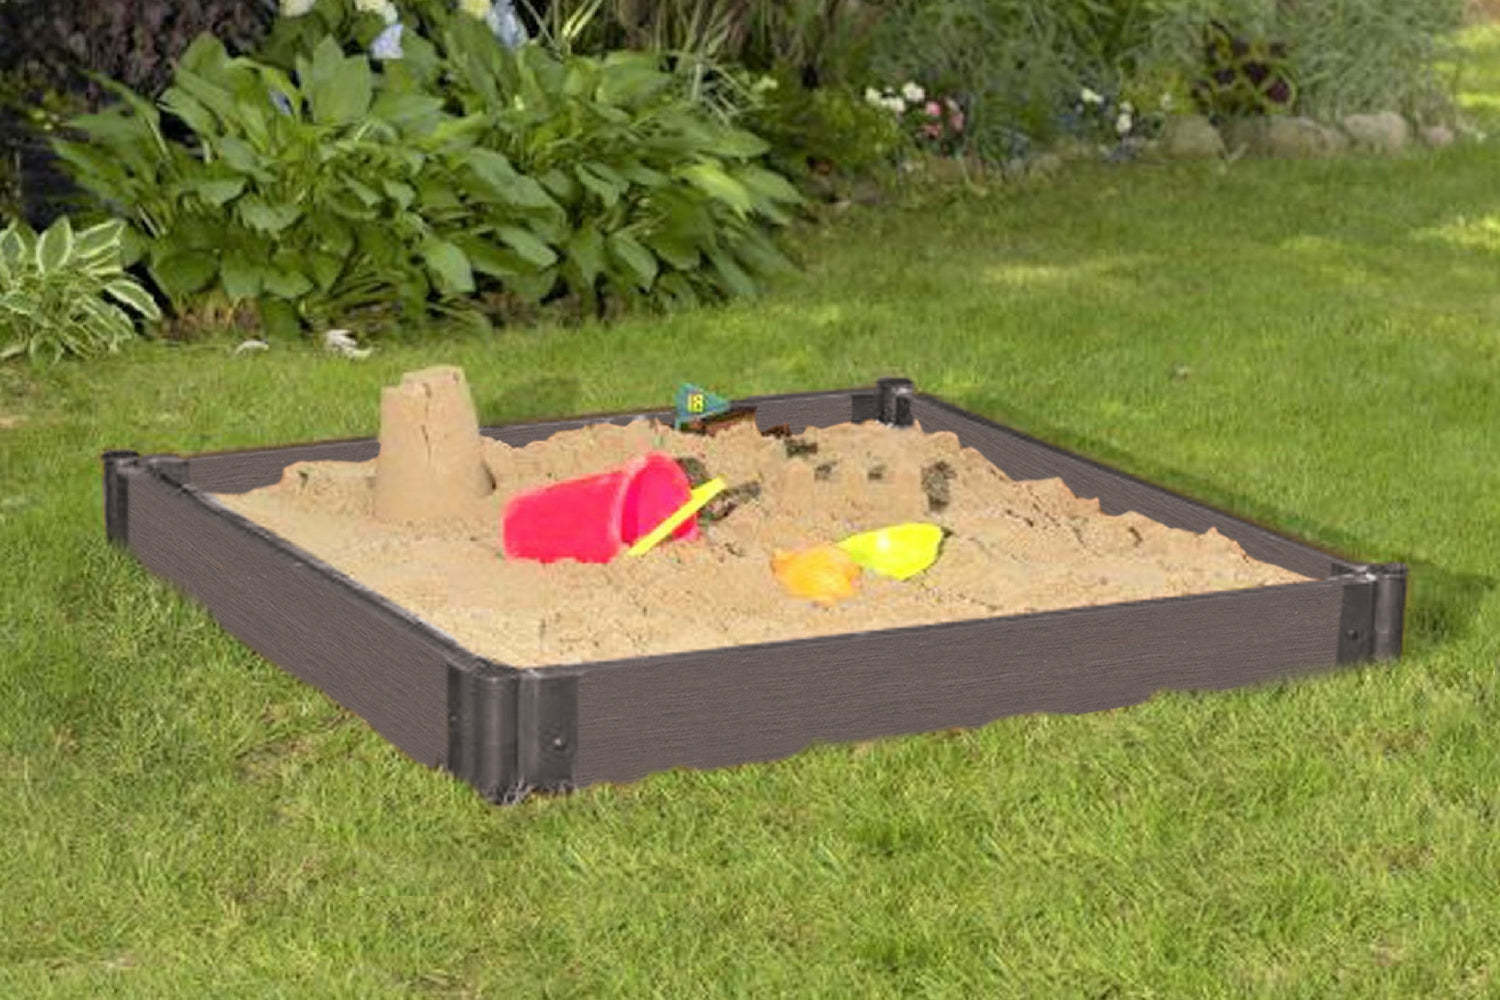 4' x 4' Composite Square Sandbox - 2 Inch Profile Sandboxes Frame It All Weathered Wood 2 Inch 5.5" Sandbox Only